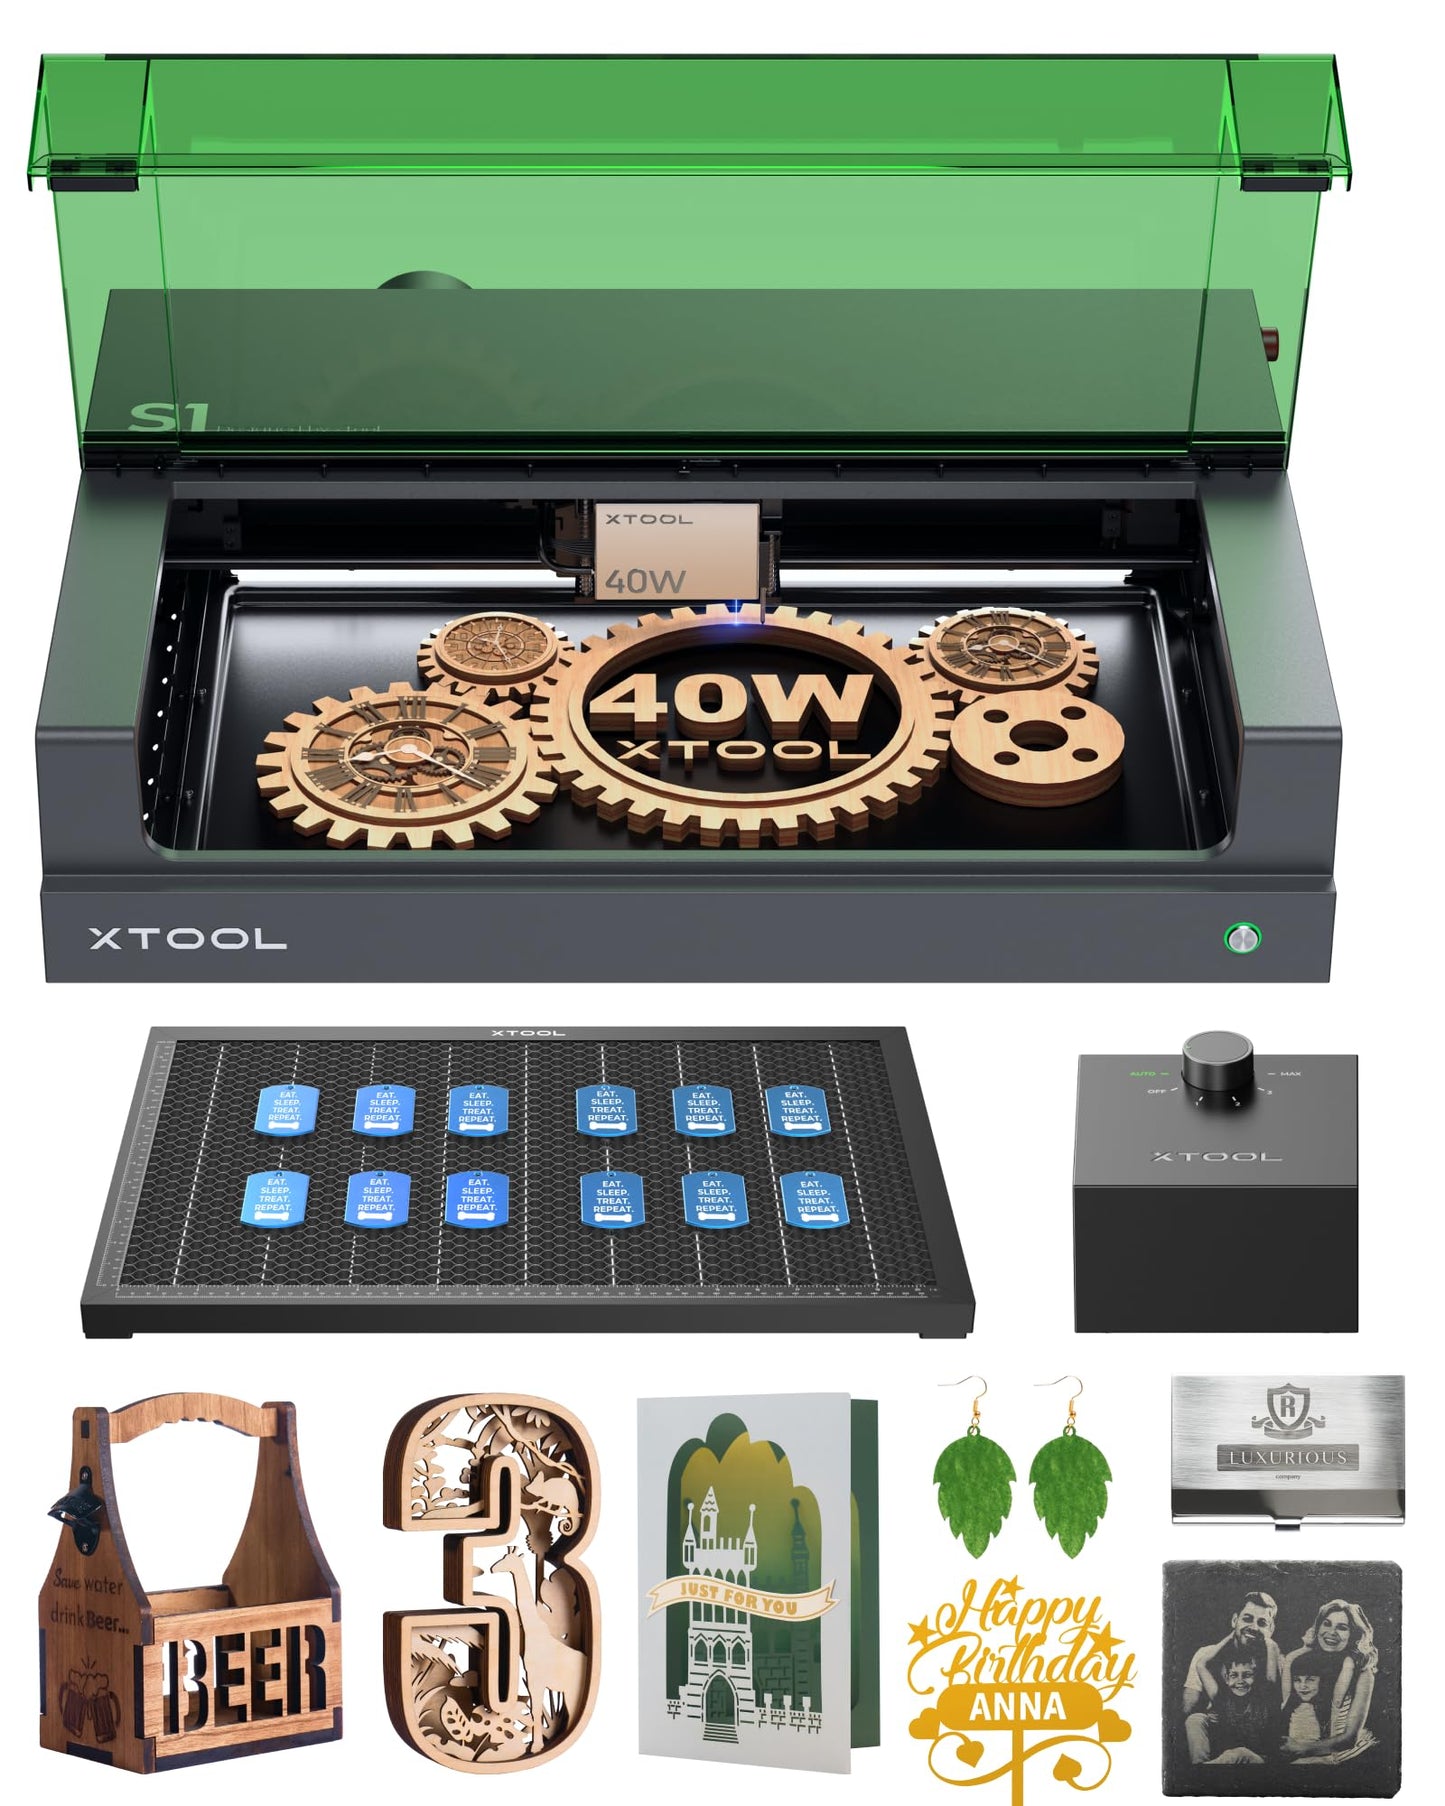 xTool S1 Enclosed Laser Cutter and Engraver Machine with Air Assist, Honeycomb, 40W Laser Power, 600mm/s, 419 * 319mm for Batch Process, Laser